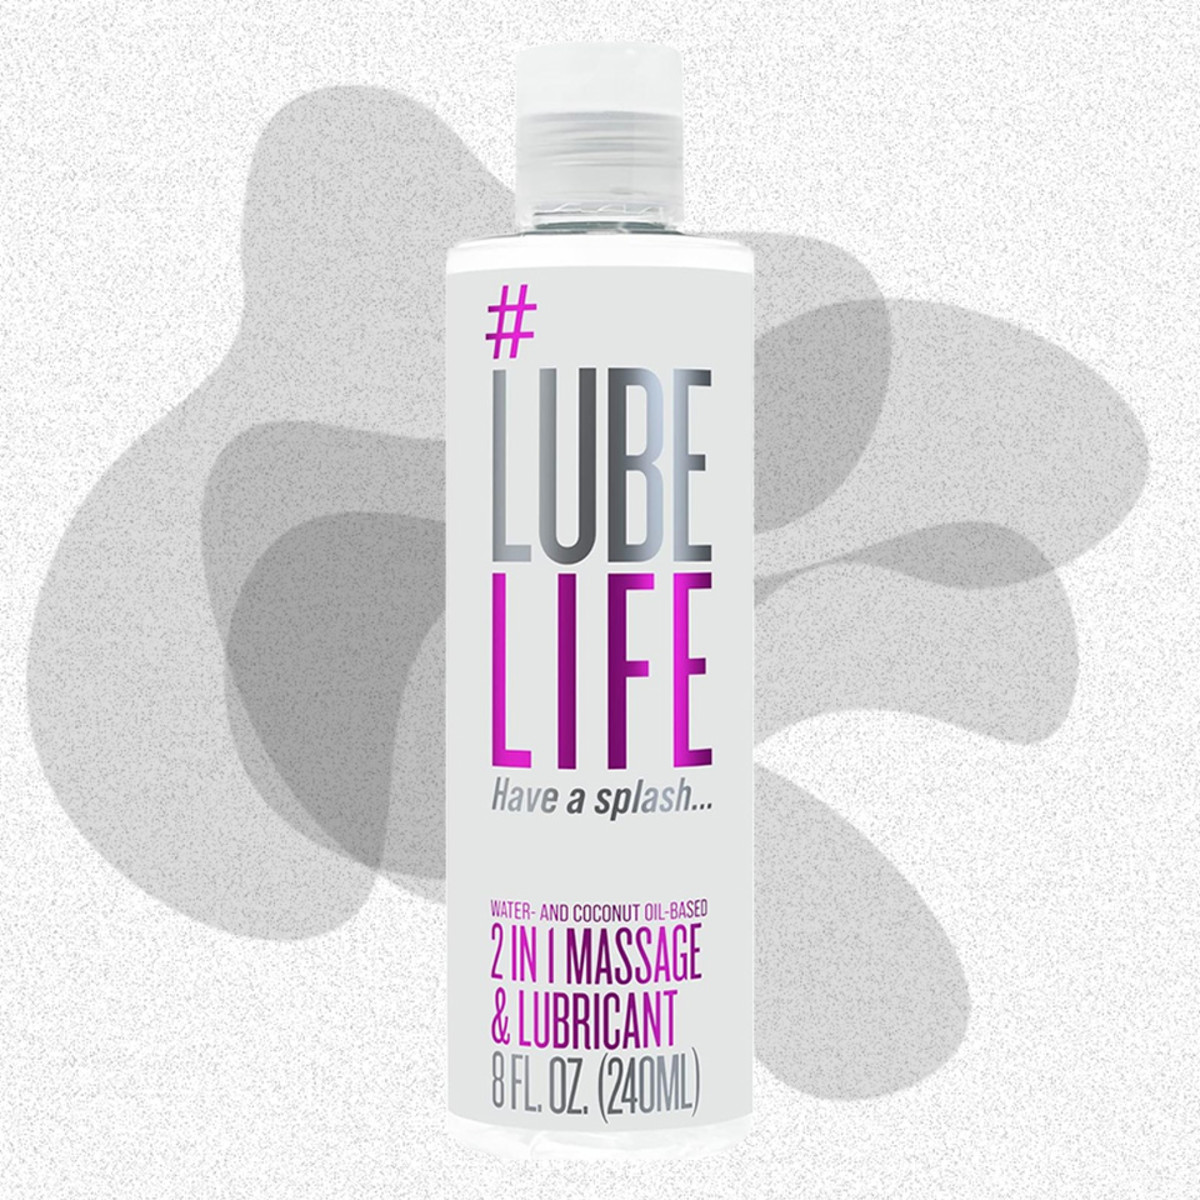 Lube Life Water-Based Lubricant: A Comprehensive Review for